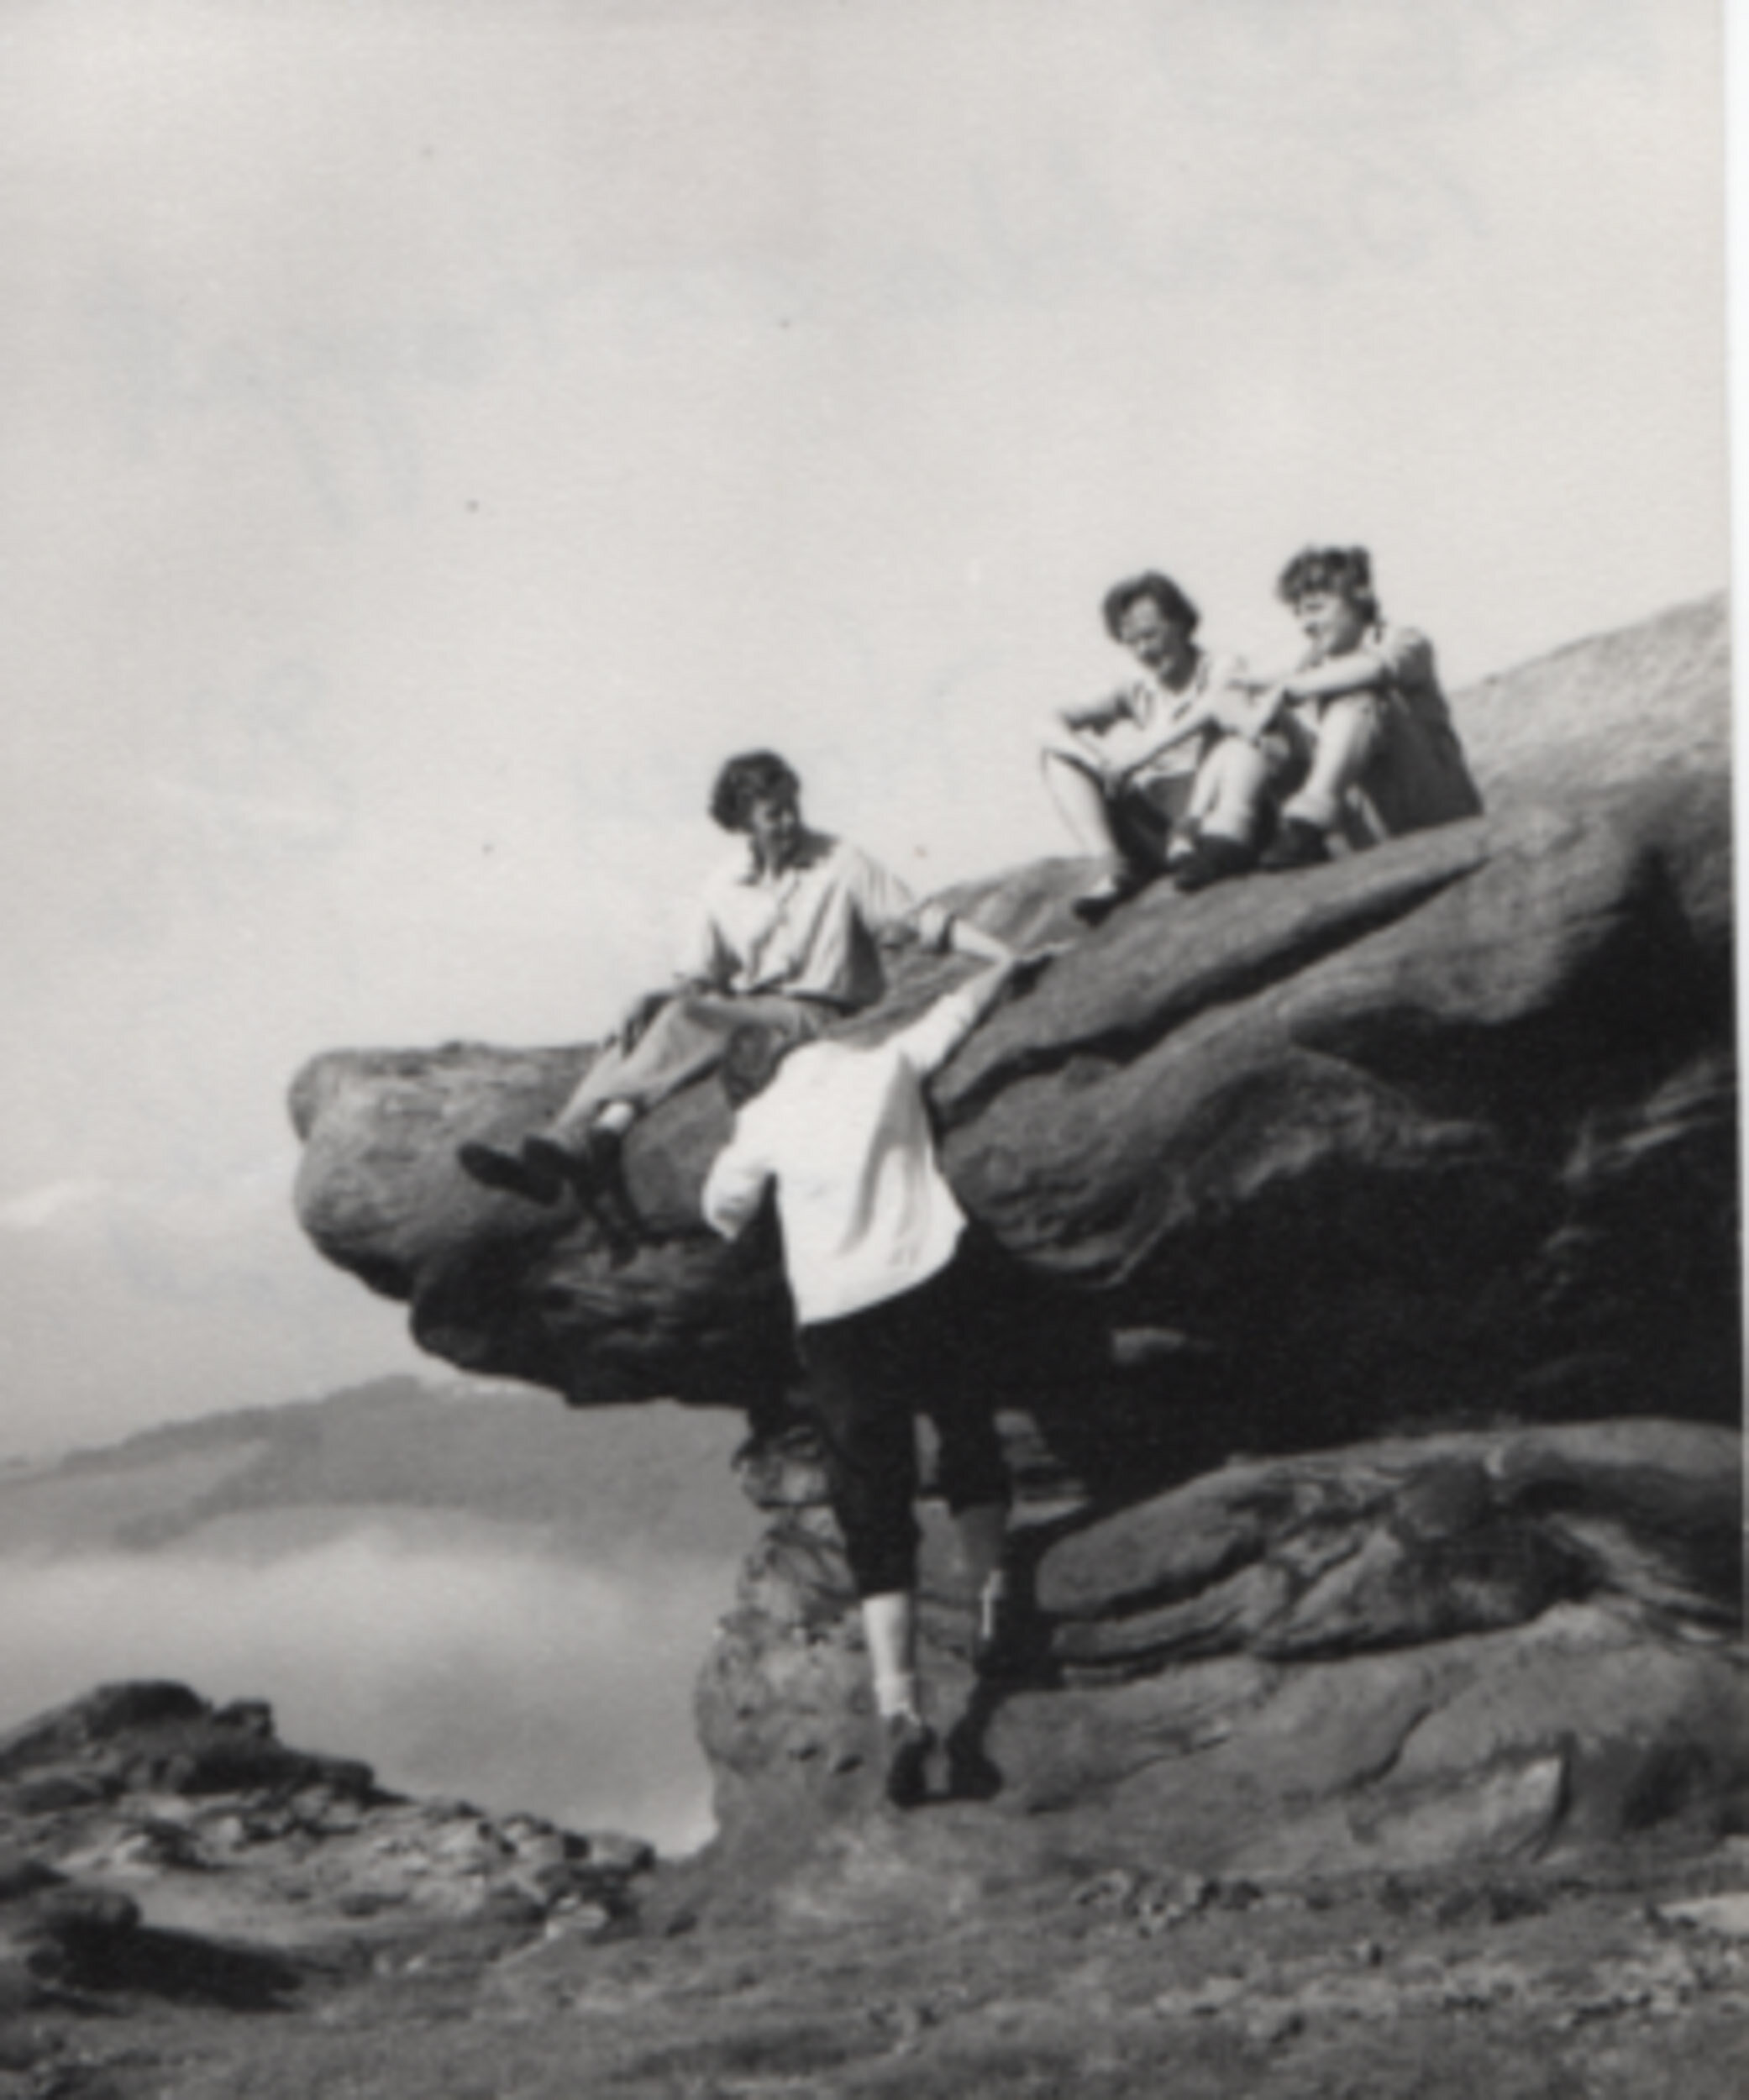 Nea Morin, Nancy Smith, Mary Fulford and Alwine Walford at Froggatt, Peak District, in 1962